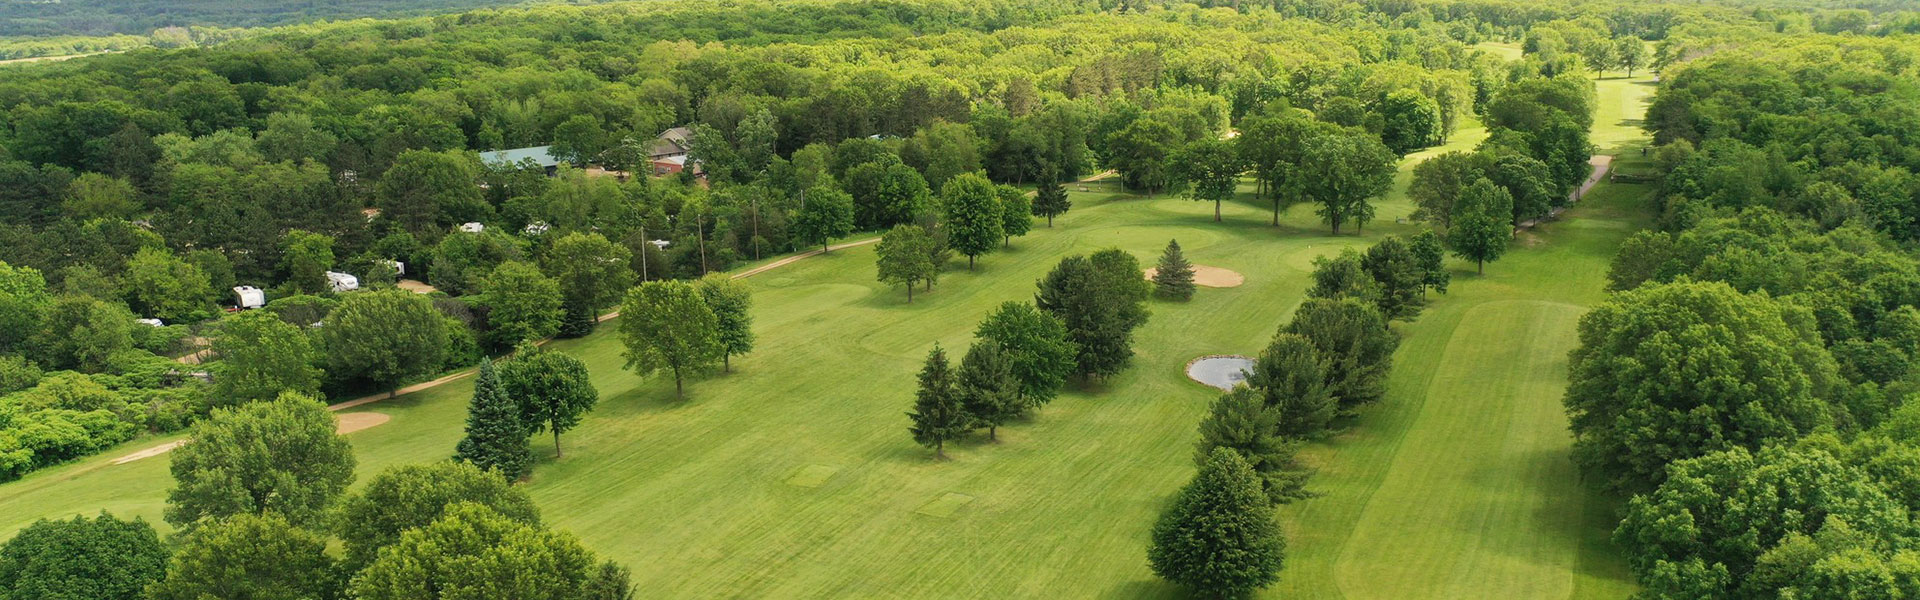 Friendly Hills Country Club - Reviews & Course Info